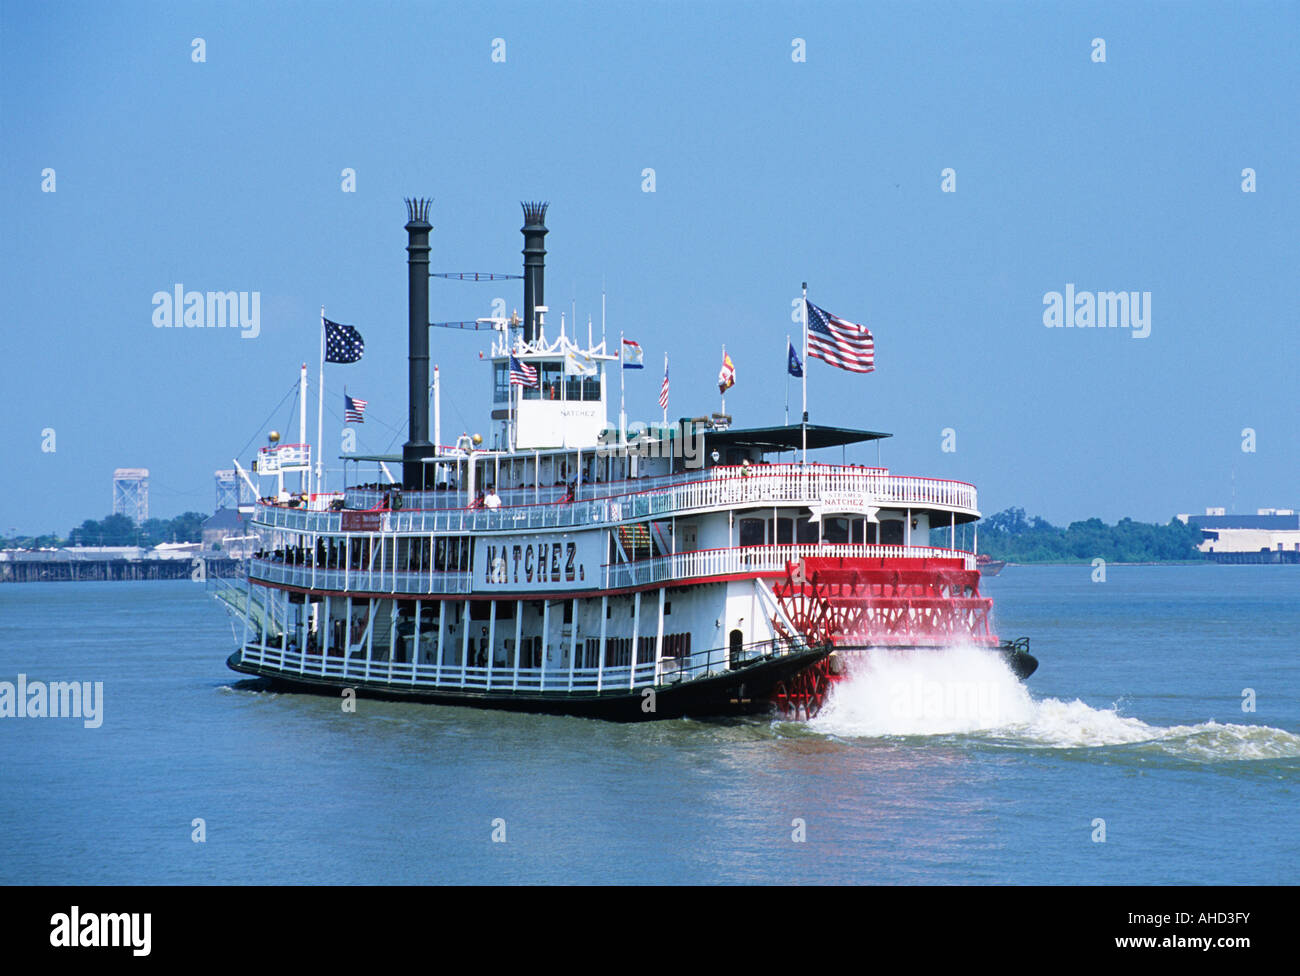 Mississippi River Sightseeing Tour Boat Stock Photos ...